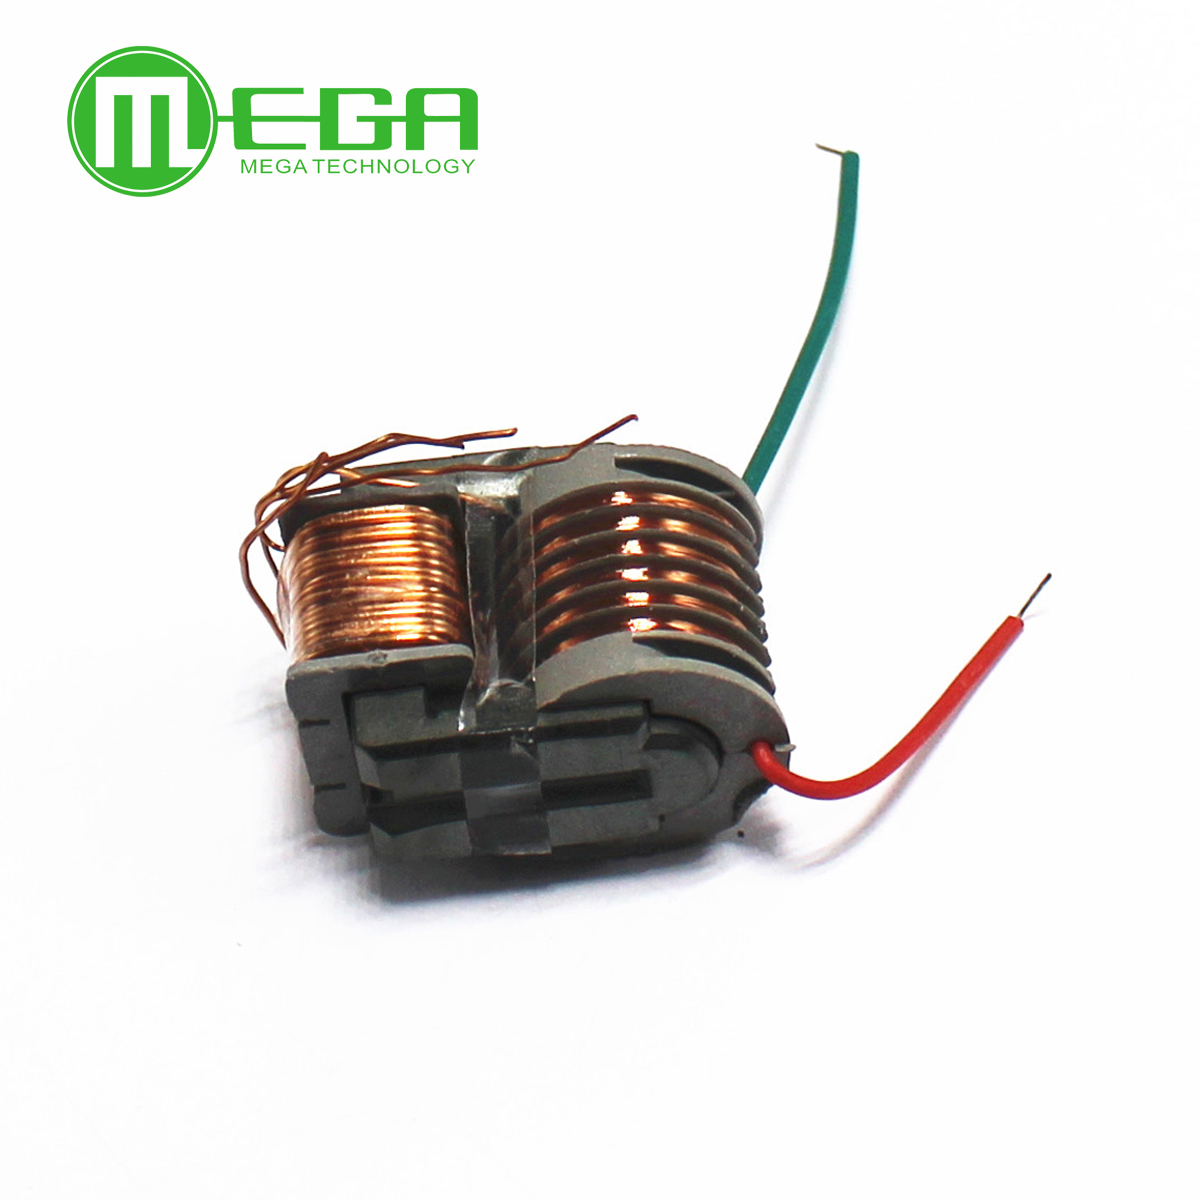 15kV High Frequency Inverter High Voltage Generator Boost Step-Up Module 